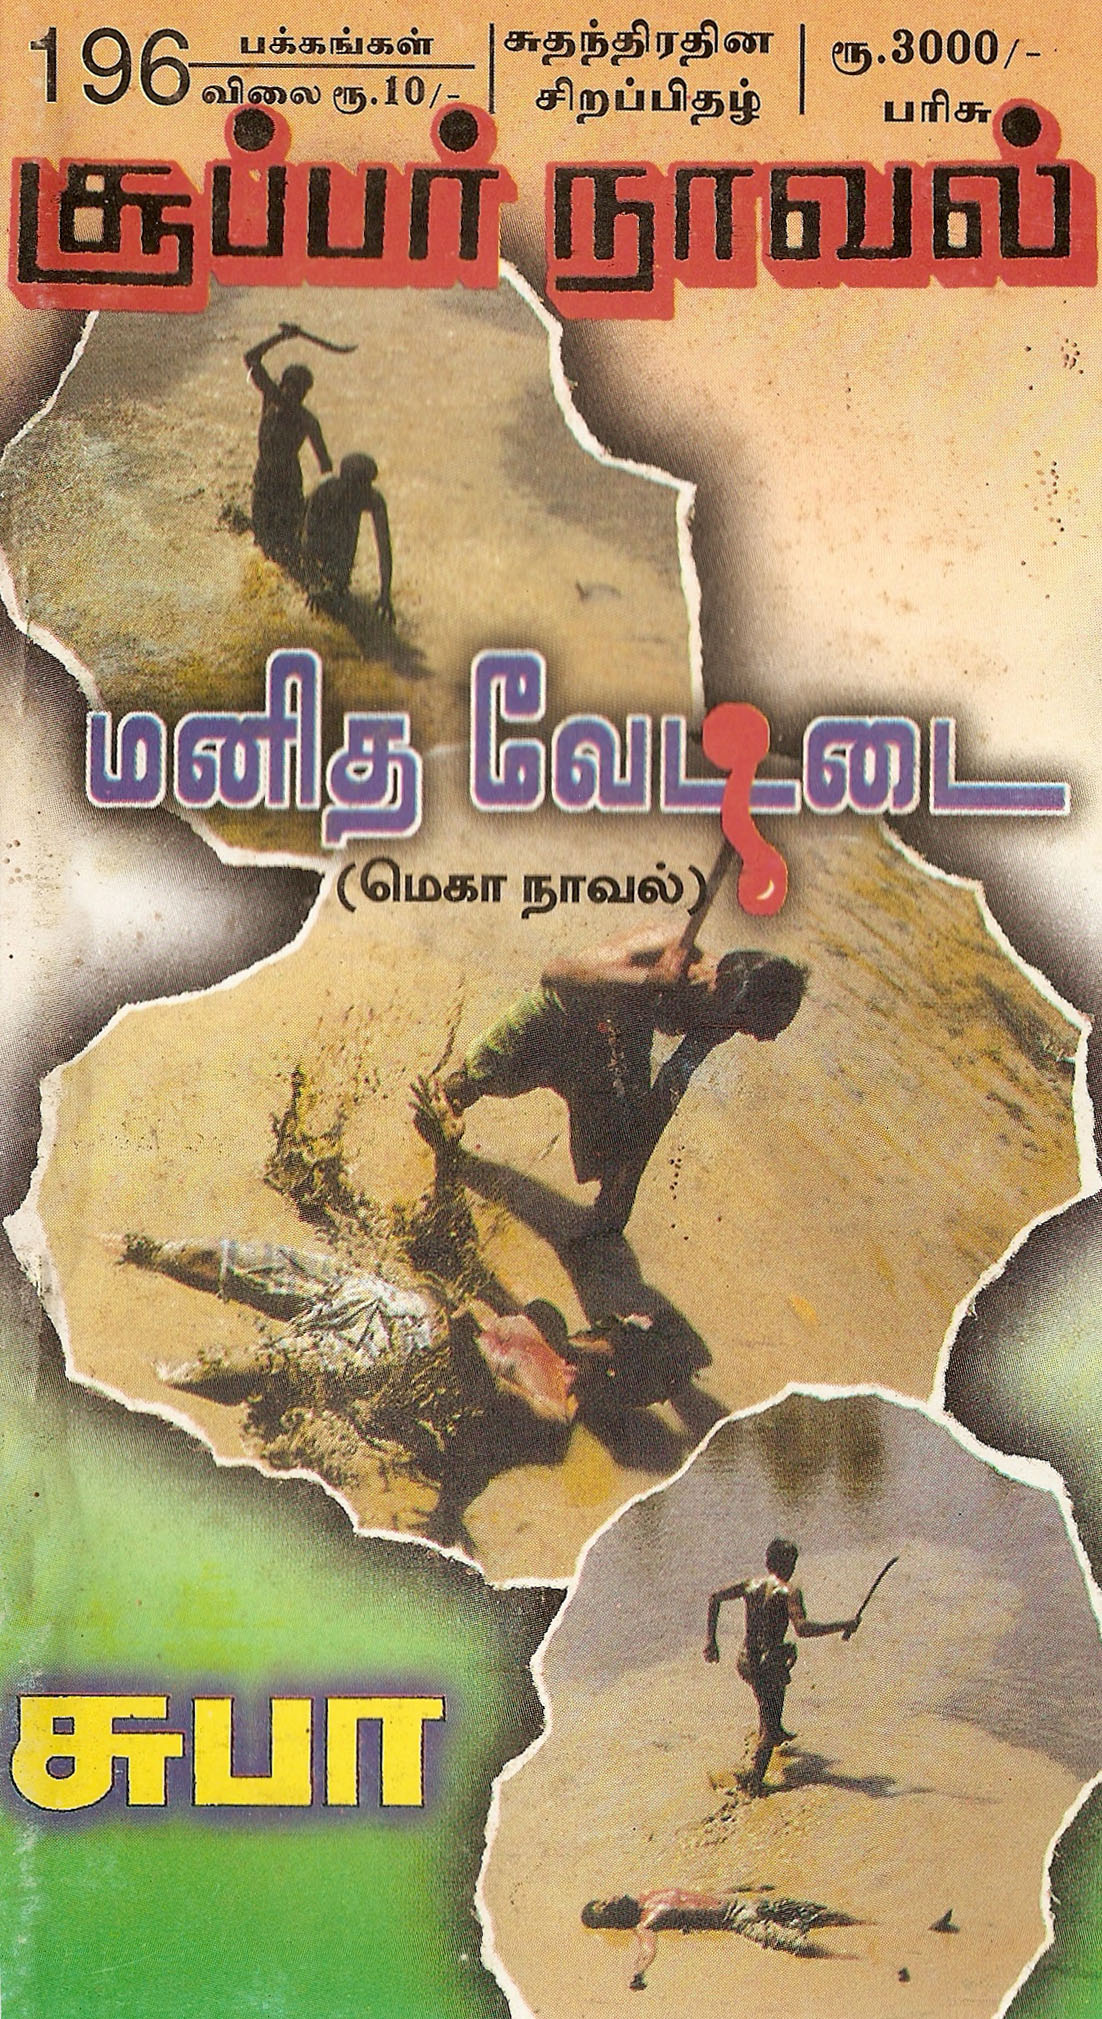 some photos taken by KV Anand for Tamil novels